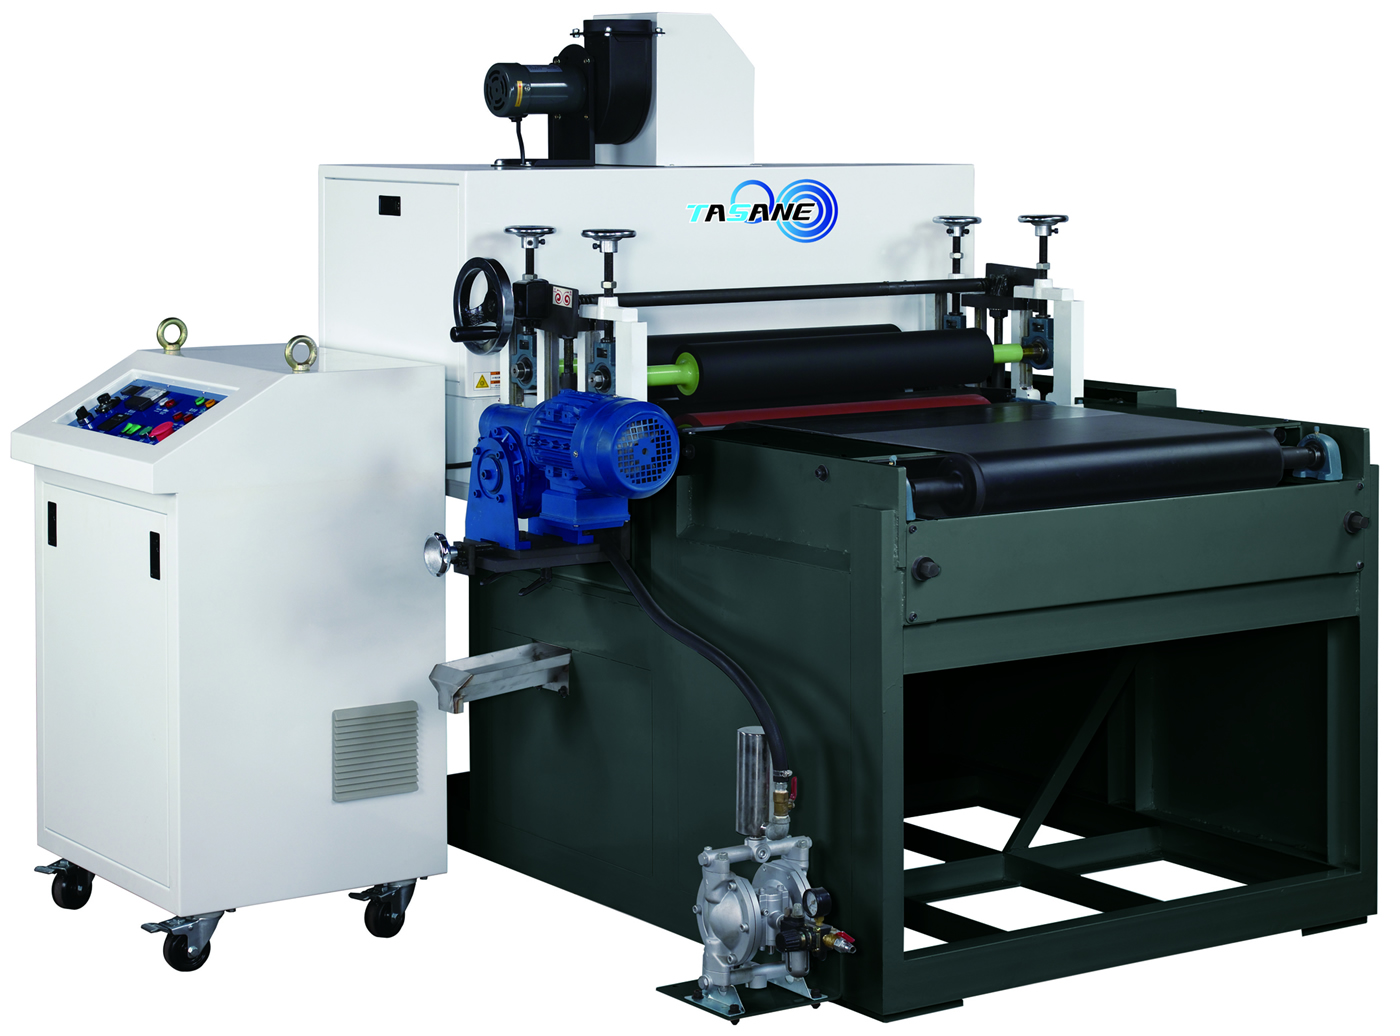 Tasane TSR-201B-201W Roller Coater and UV Curing Machine